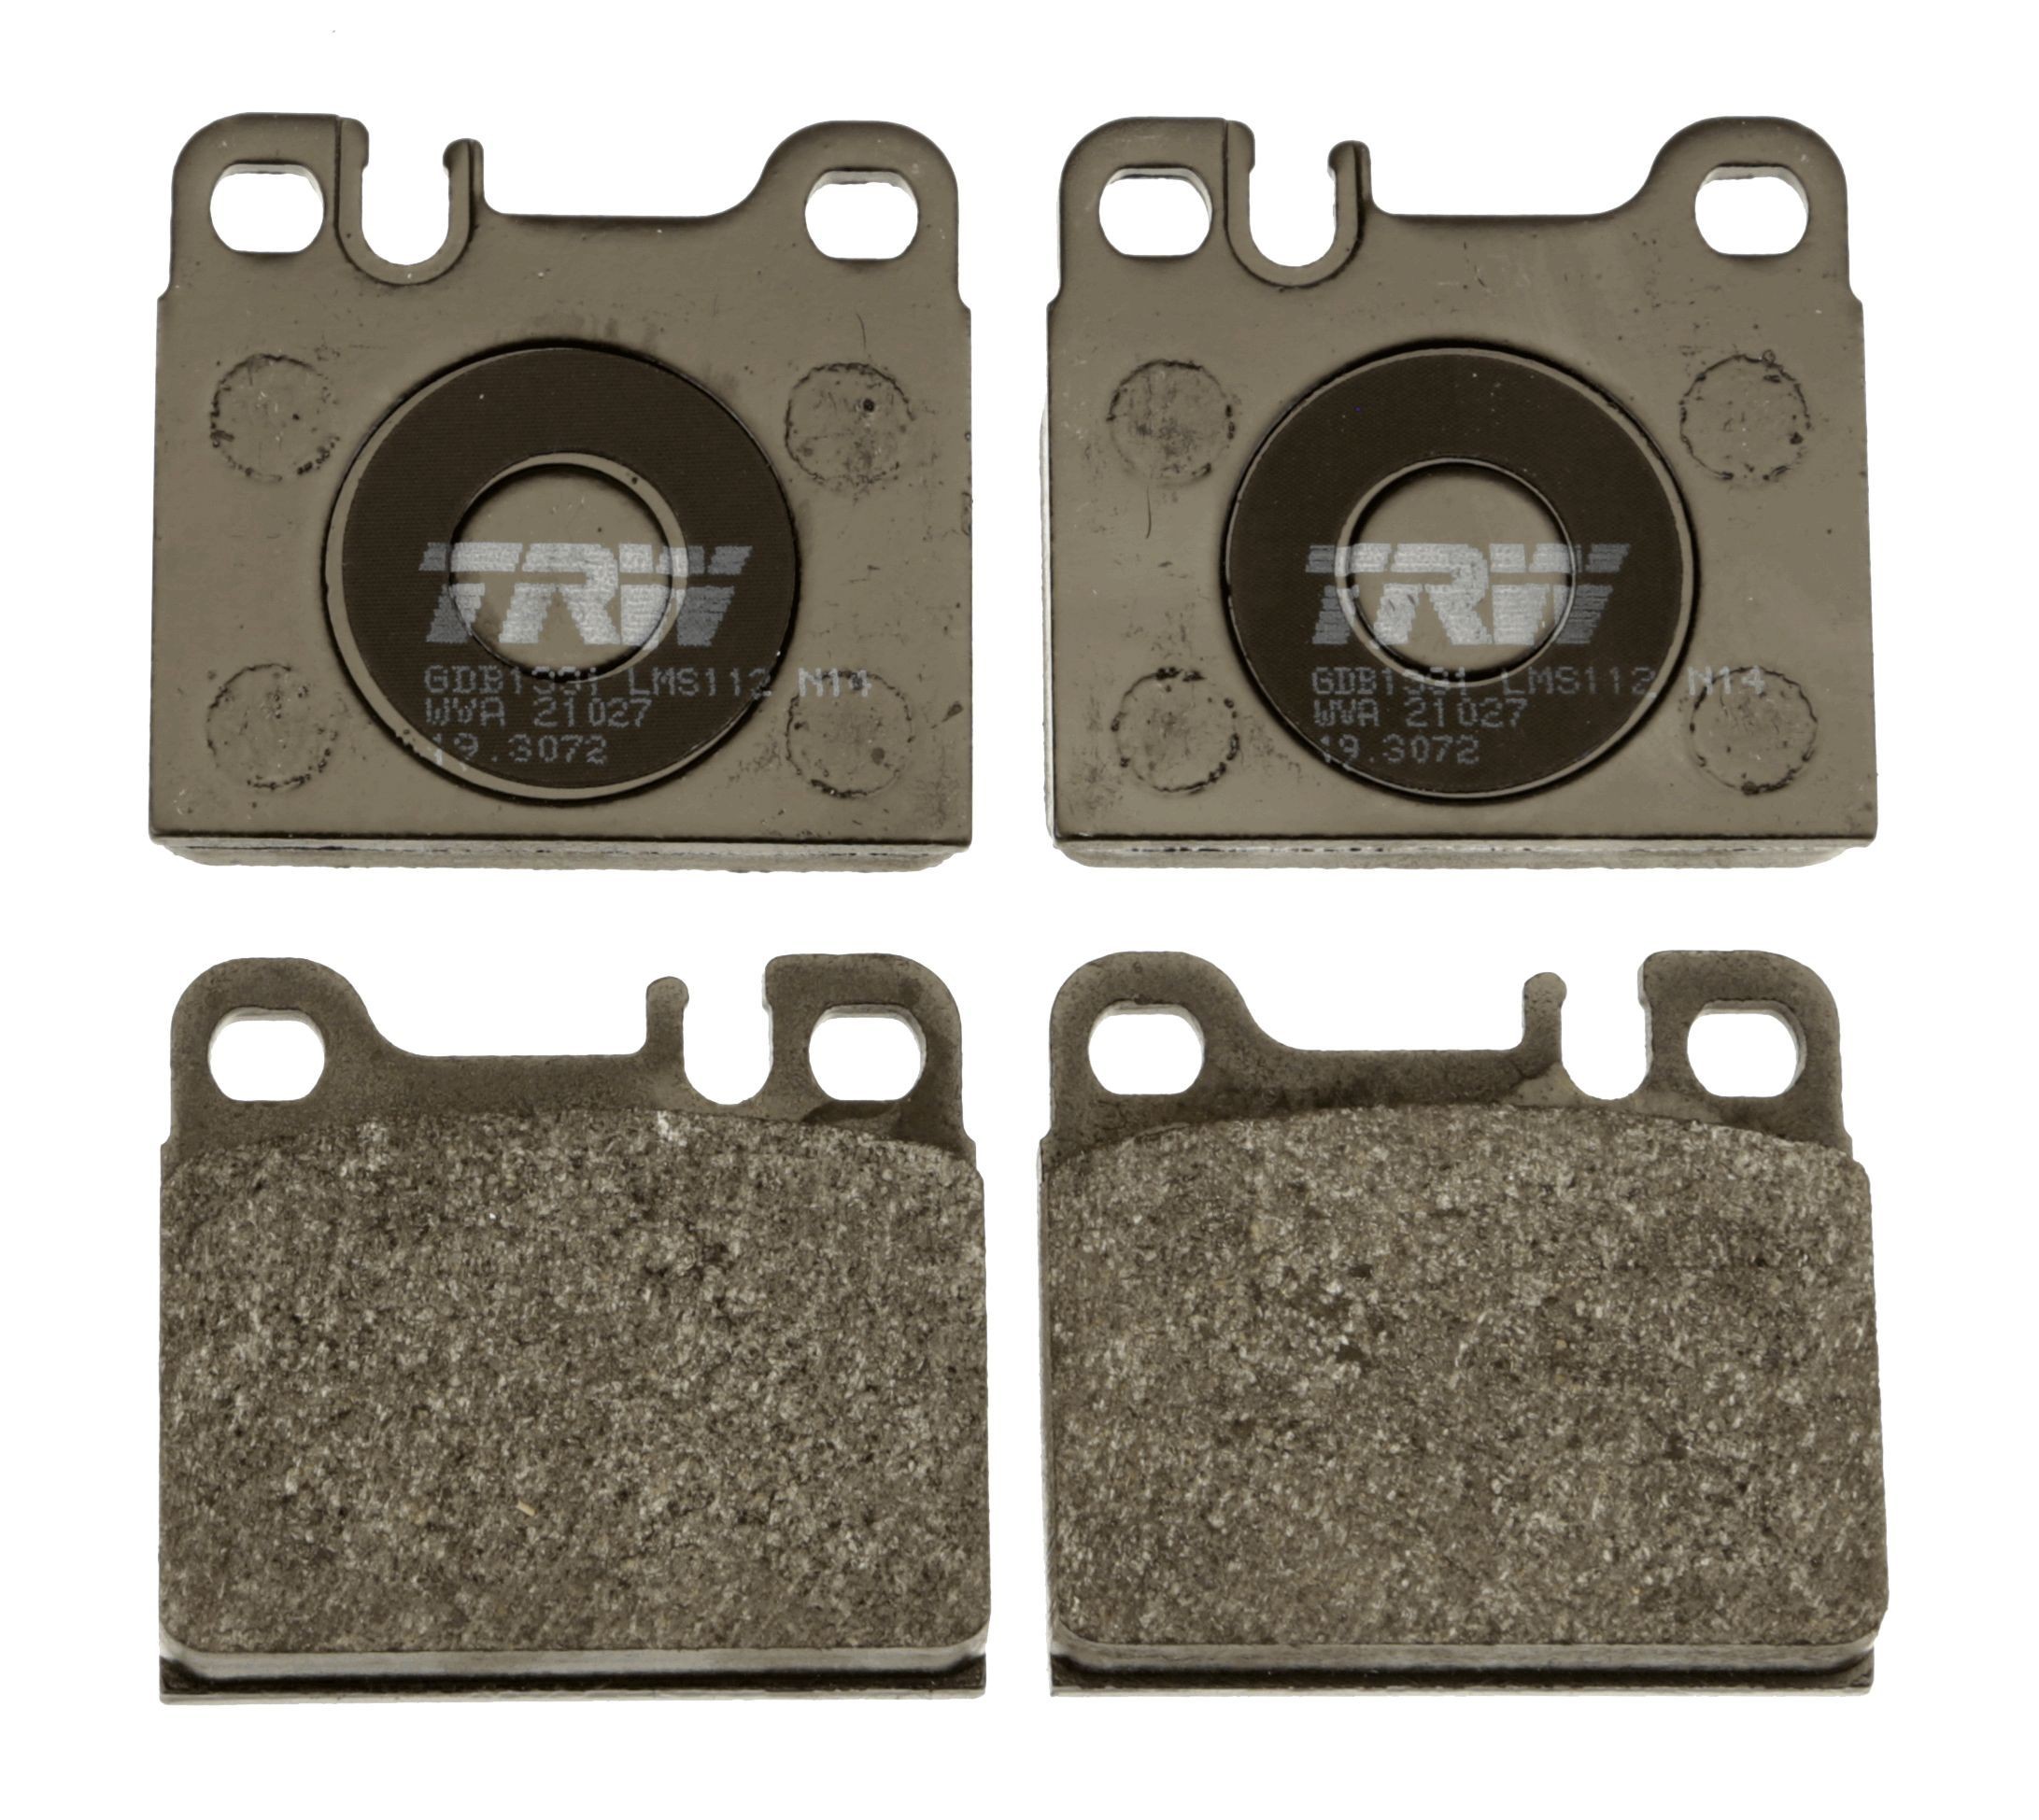 TRW Brake pad kit GDB1331 suitable for MERCEDES-BENZ S-Class, SL